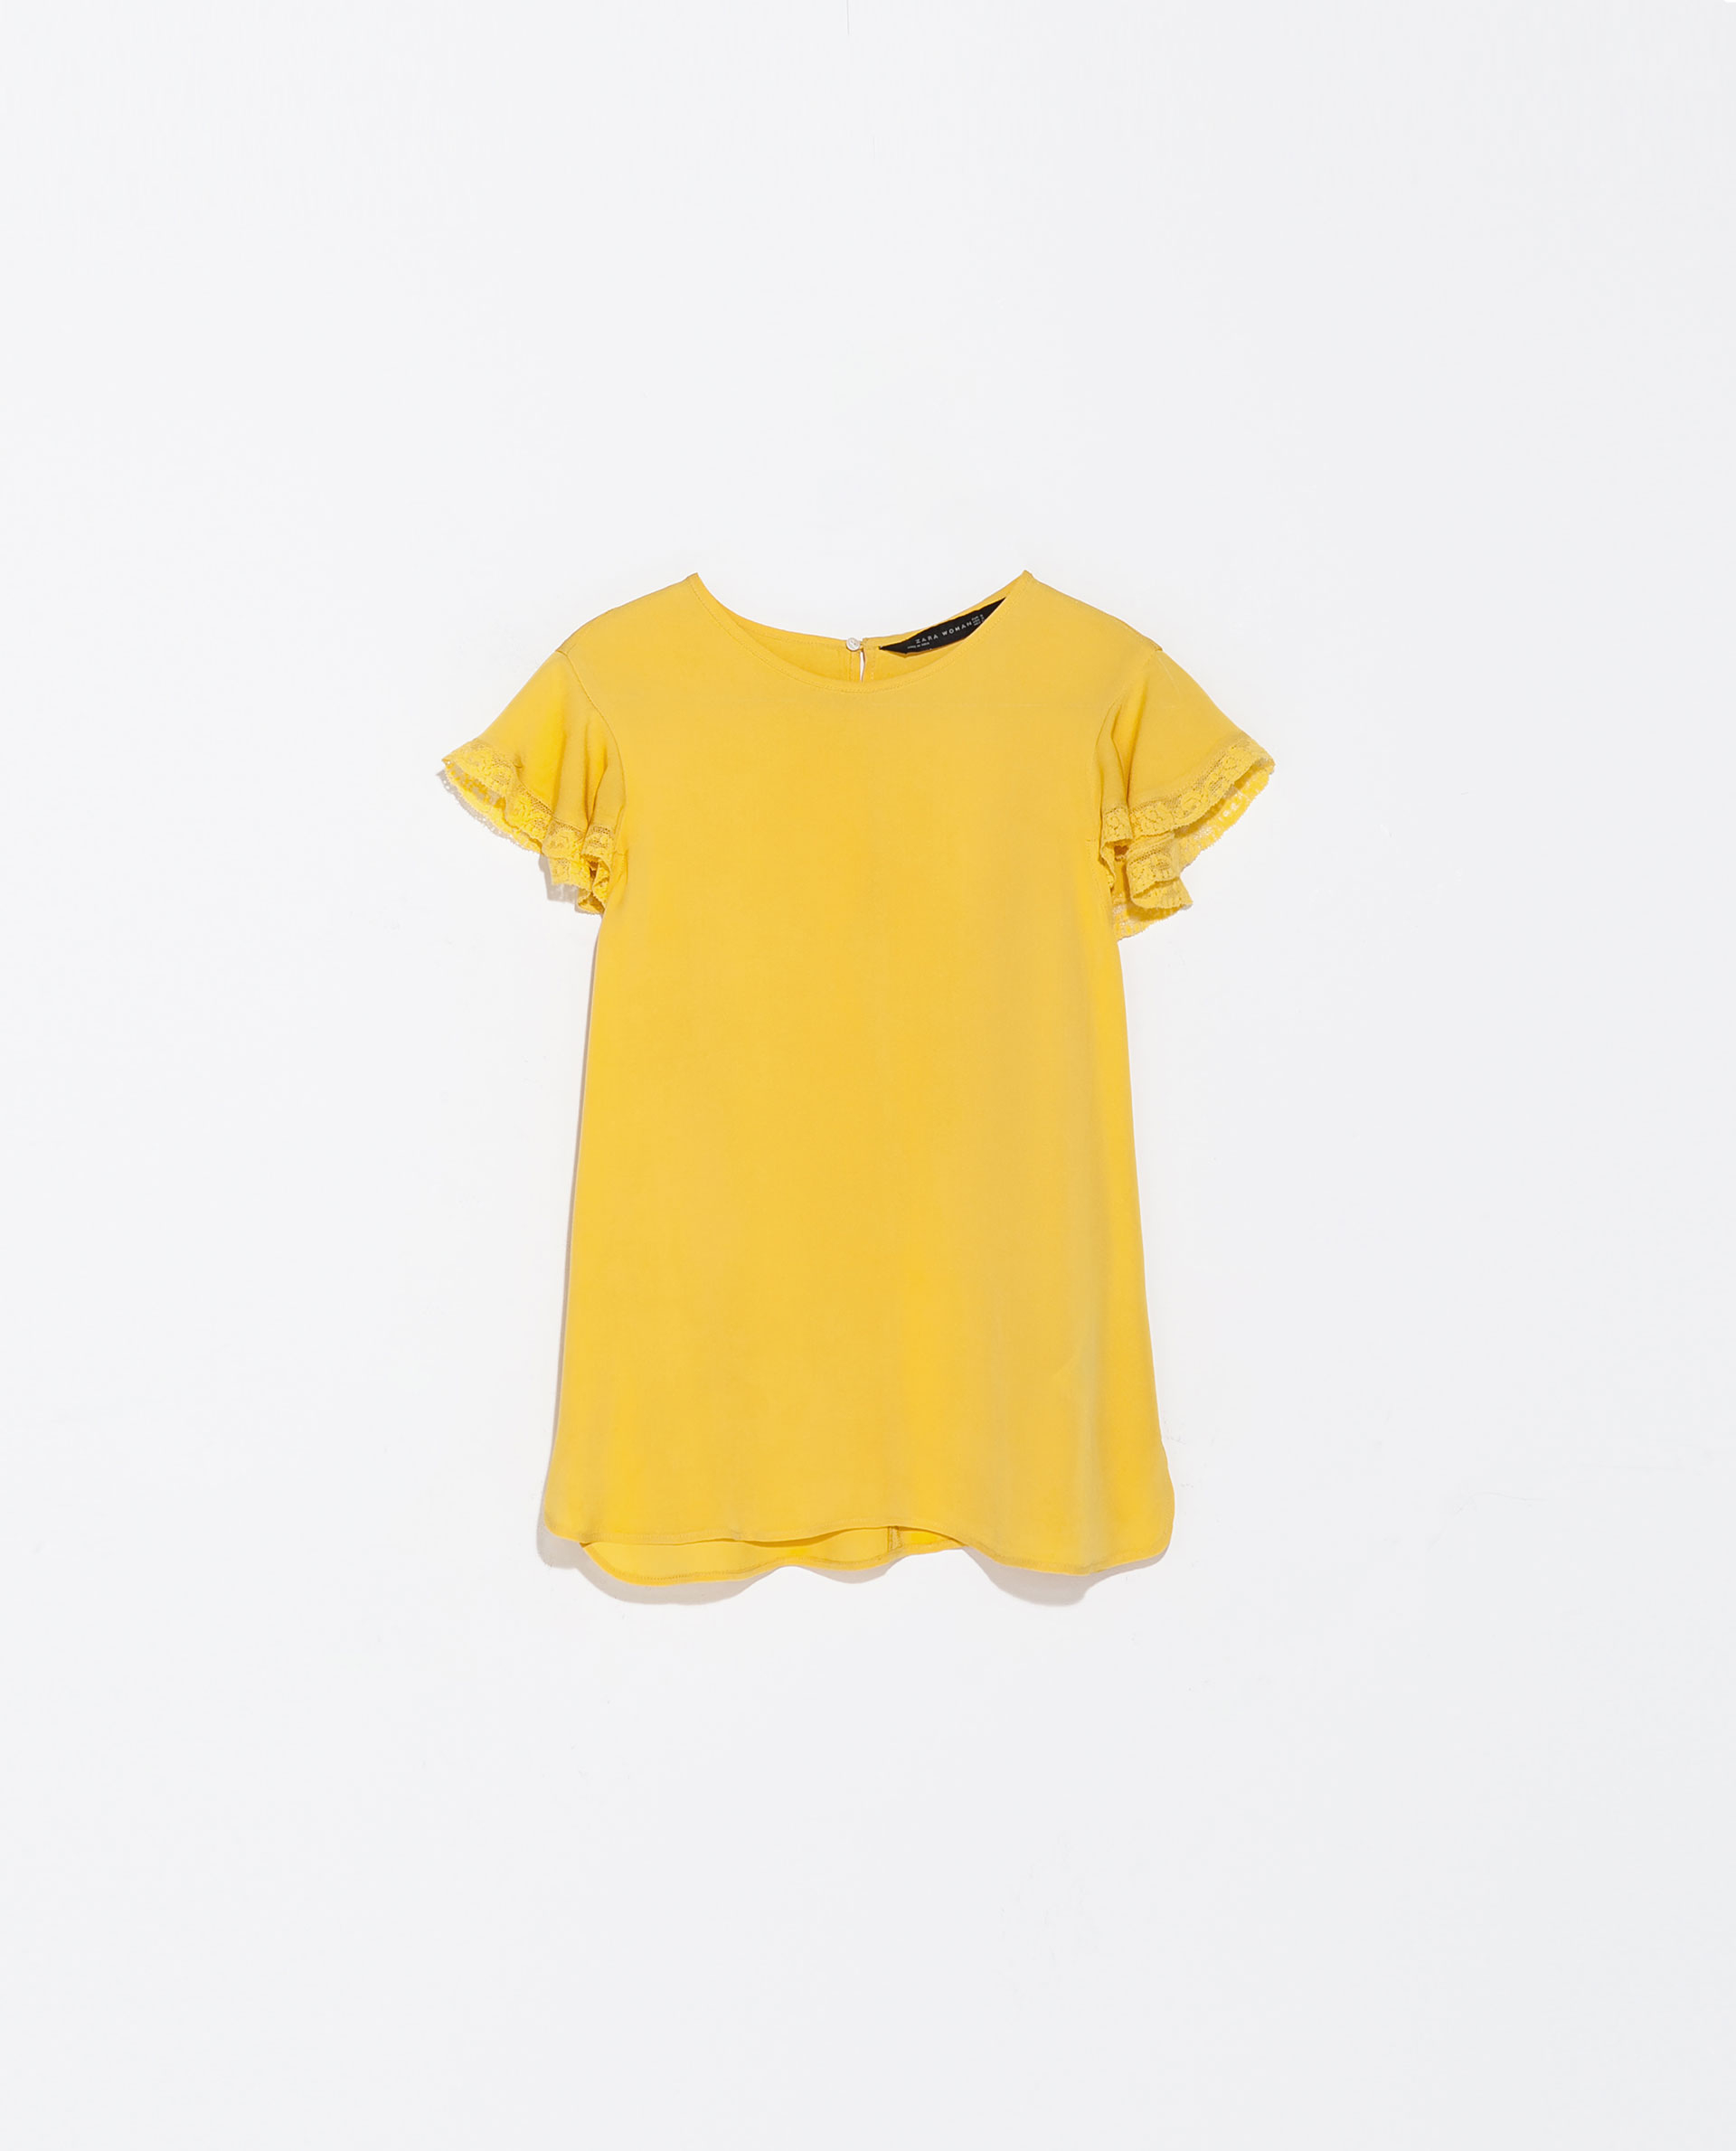 yellow blouse gallery OLGPOER